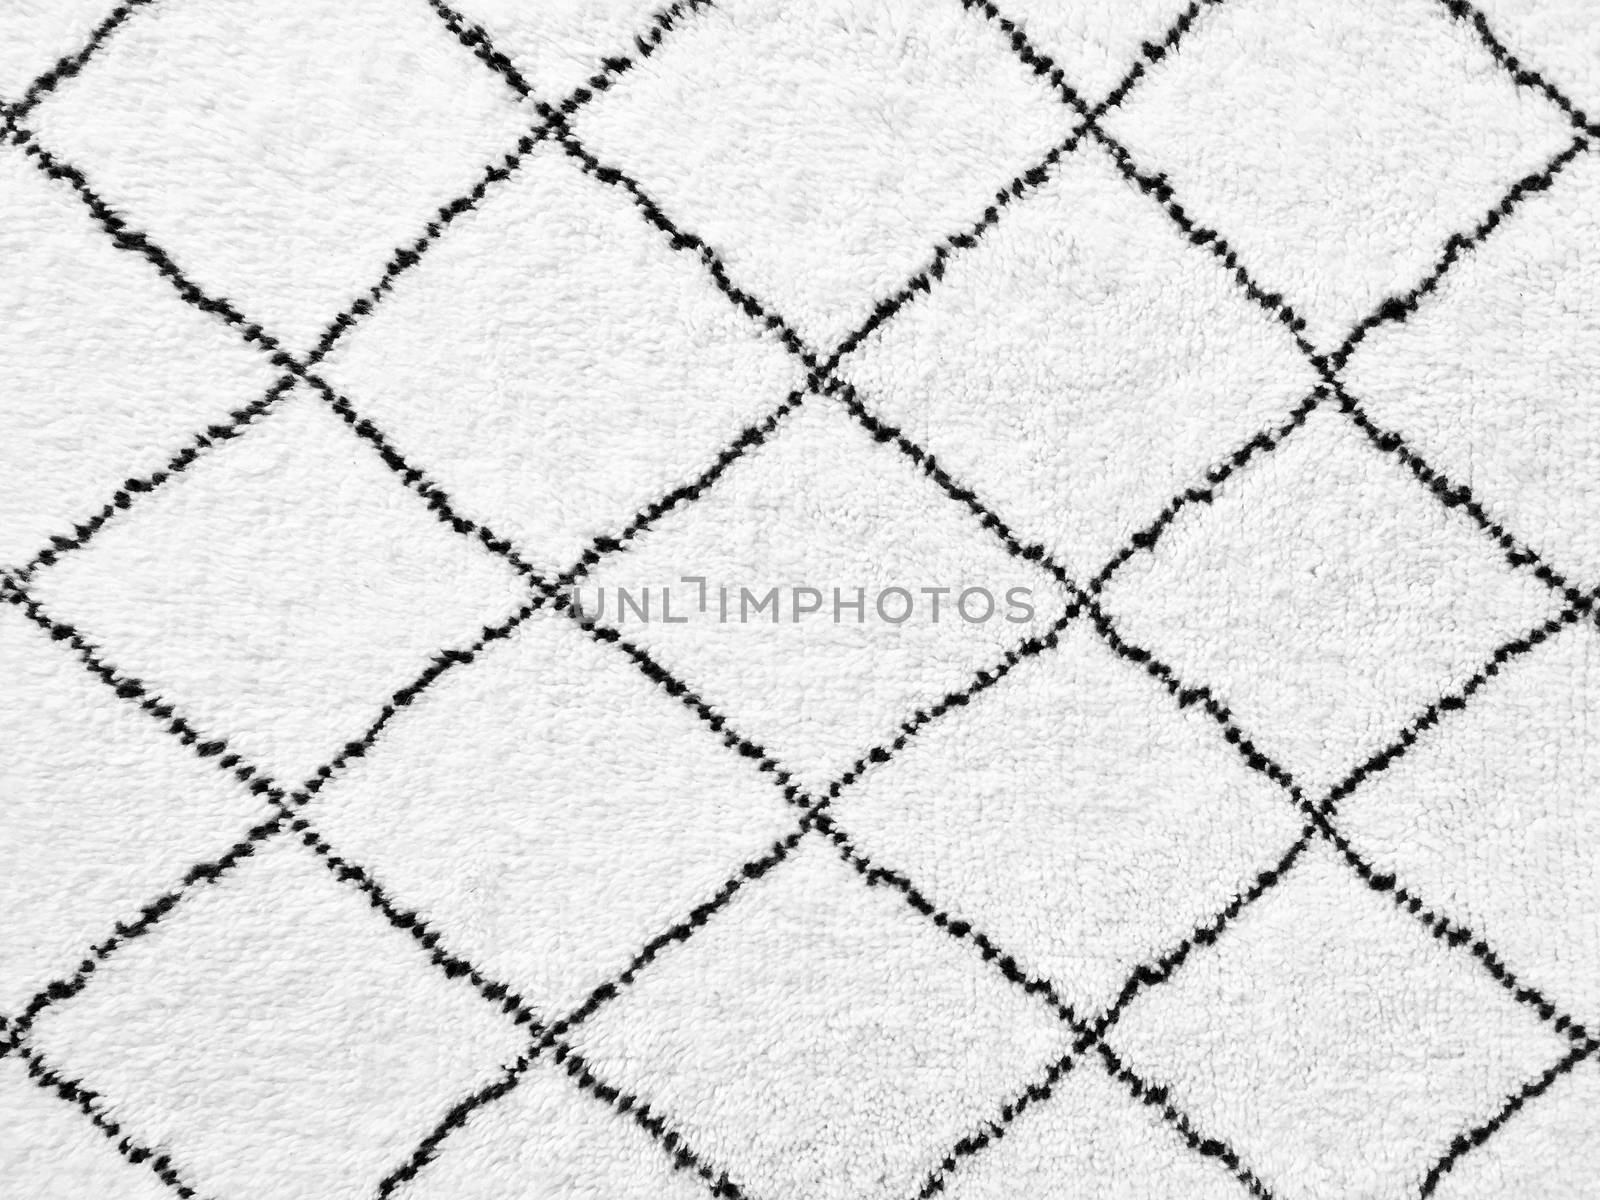 White rug with black lines. Simple geometric design.